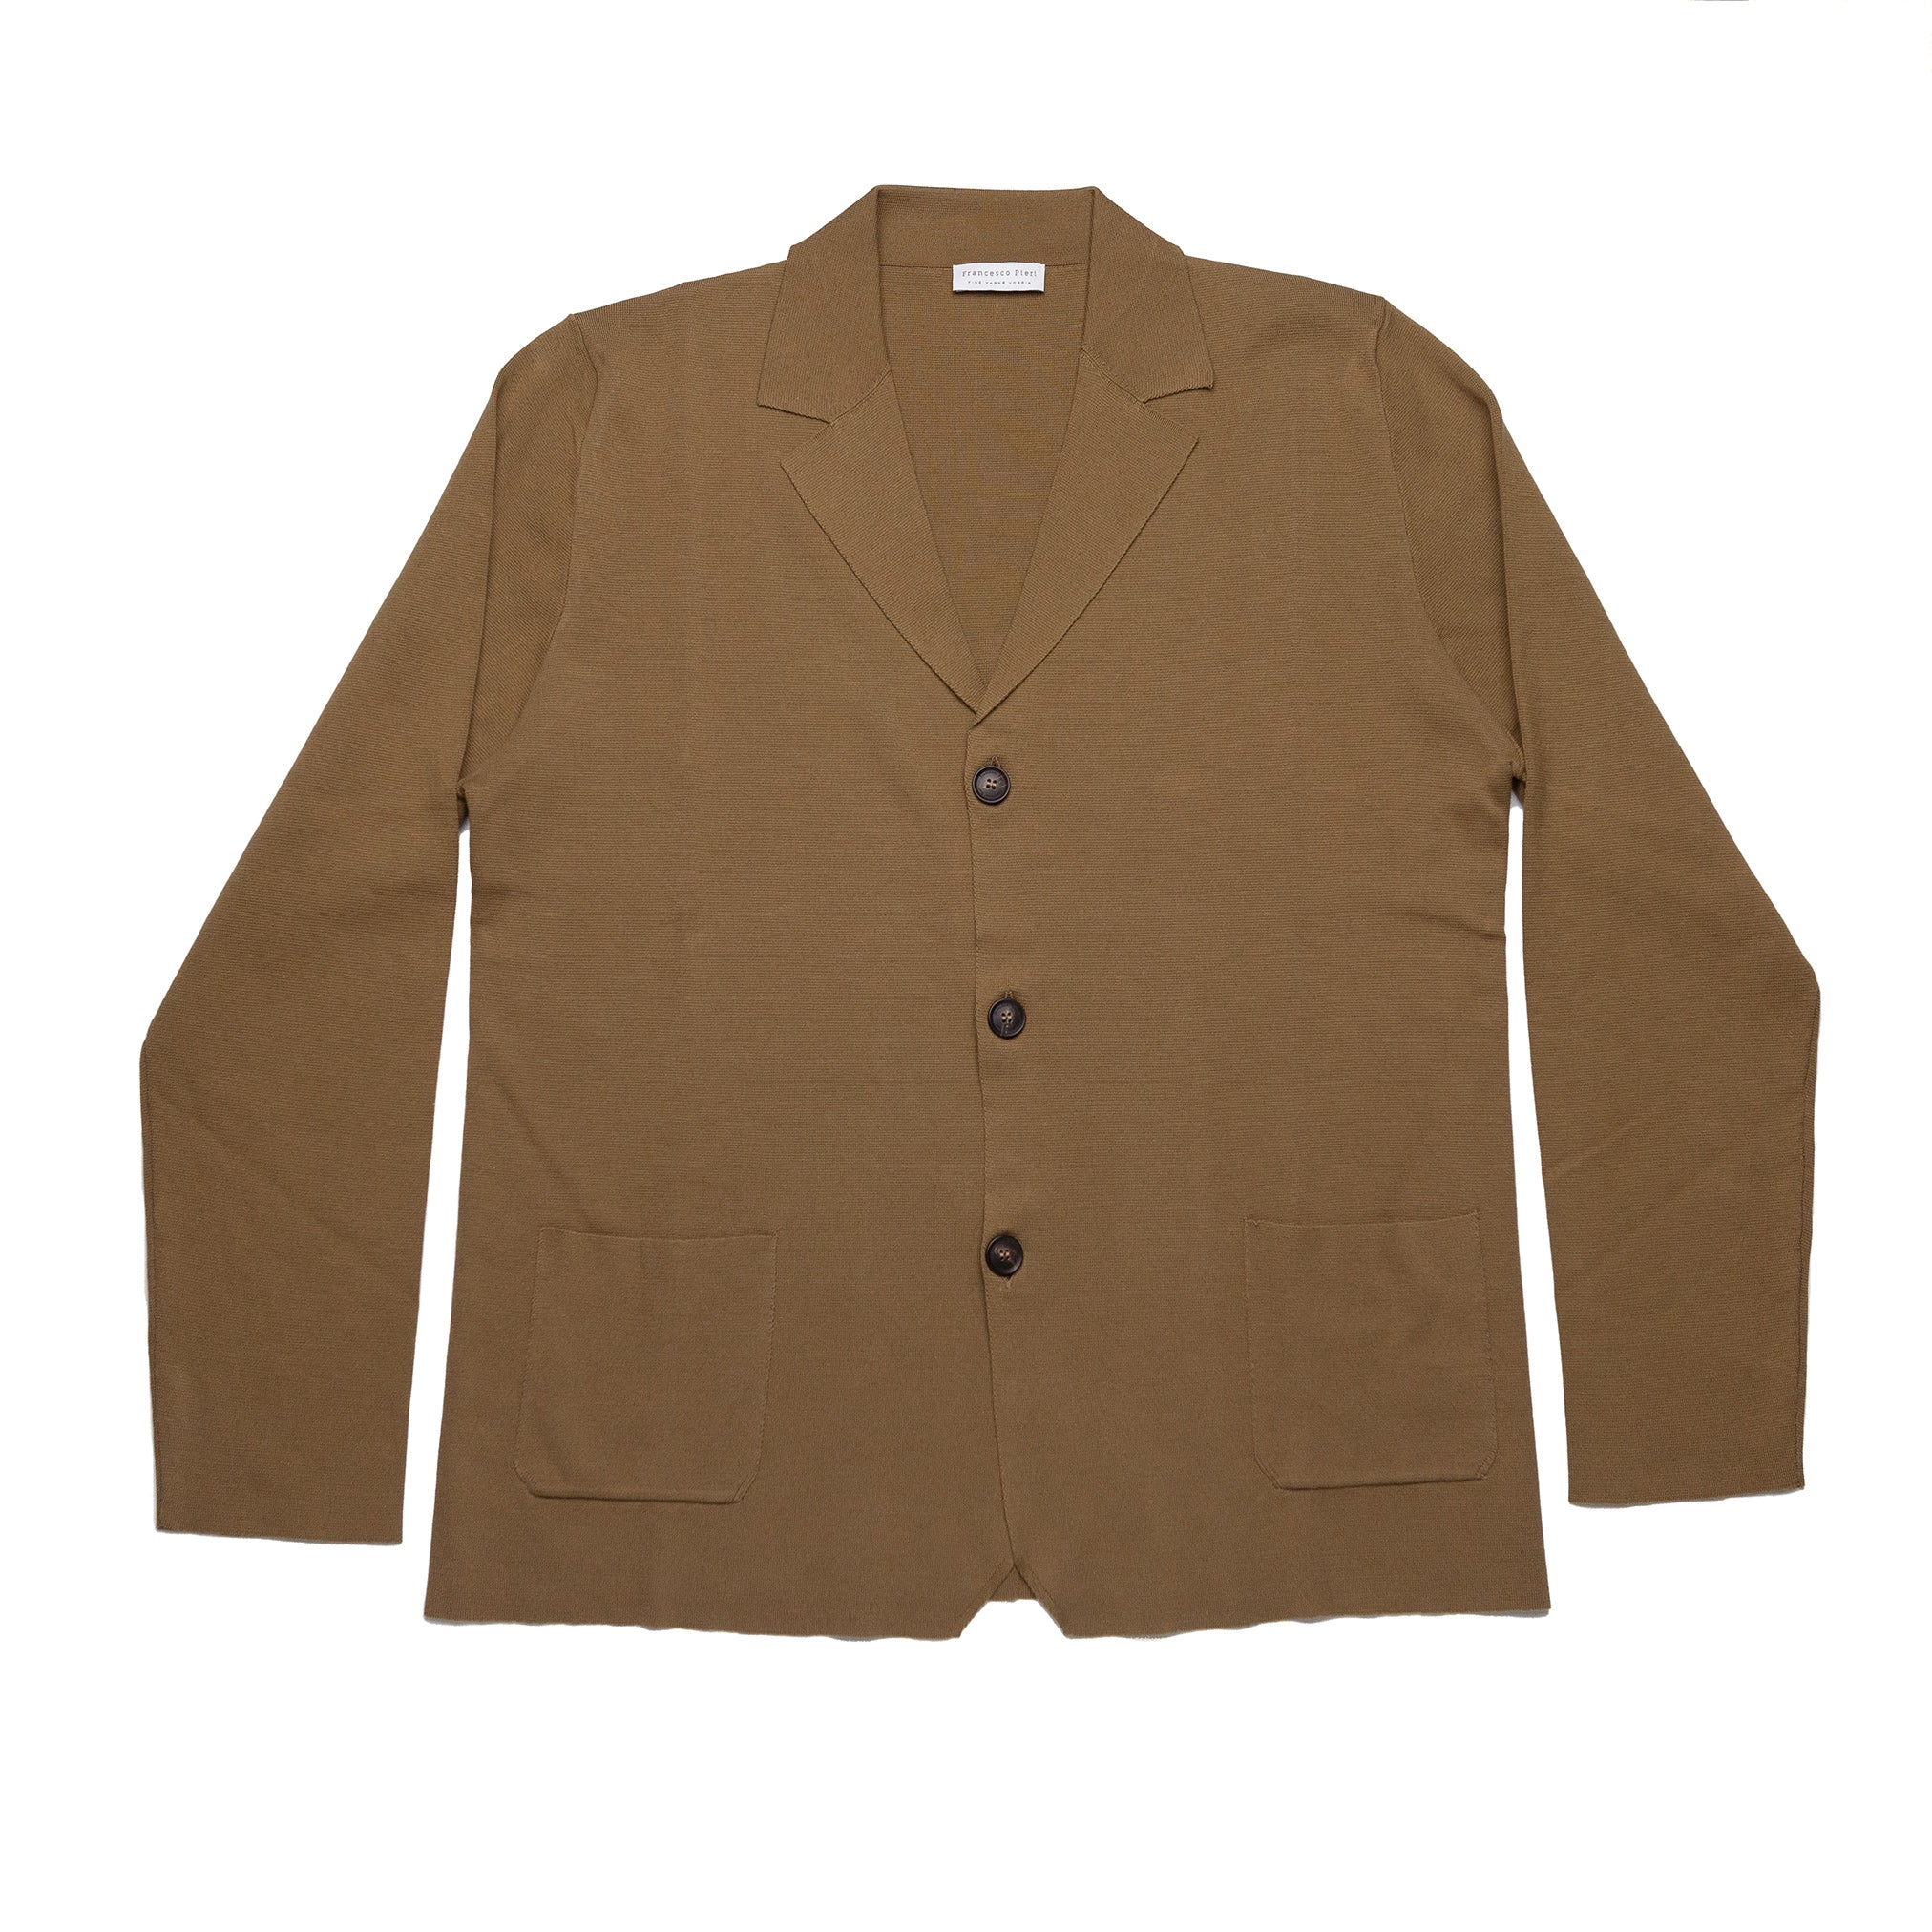 Jacket in Tan Cotton